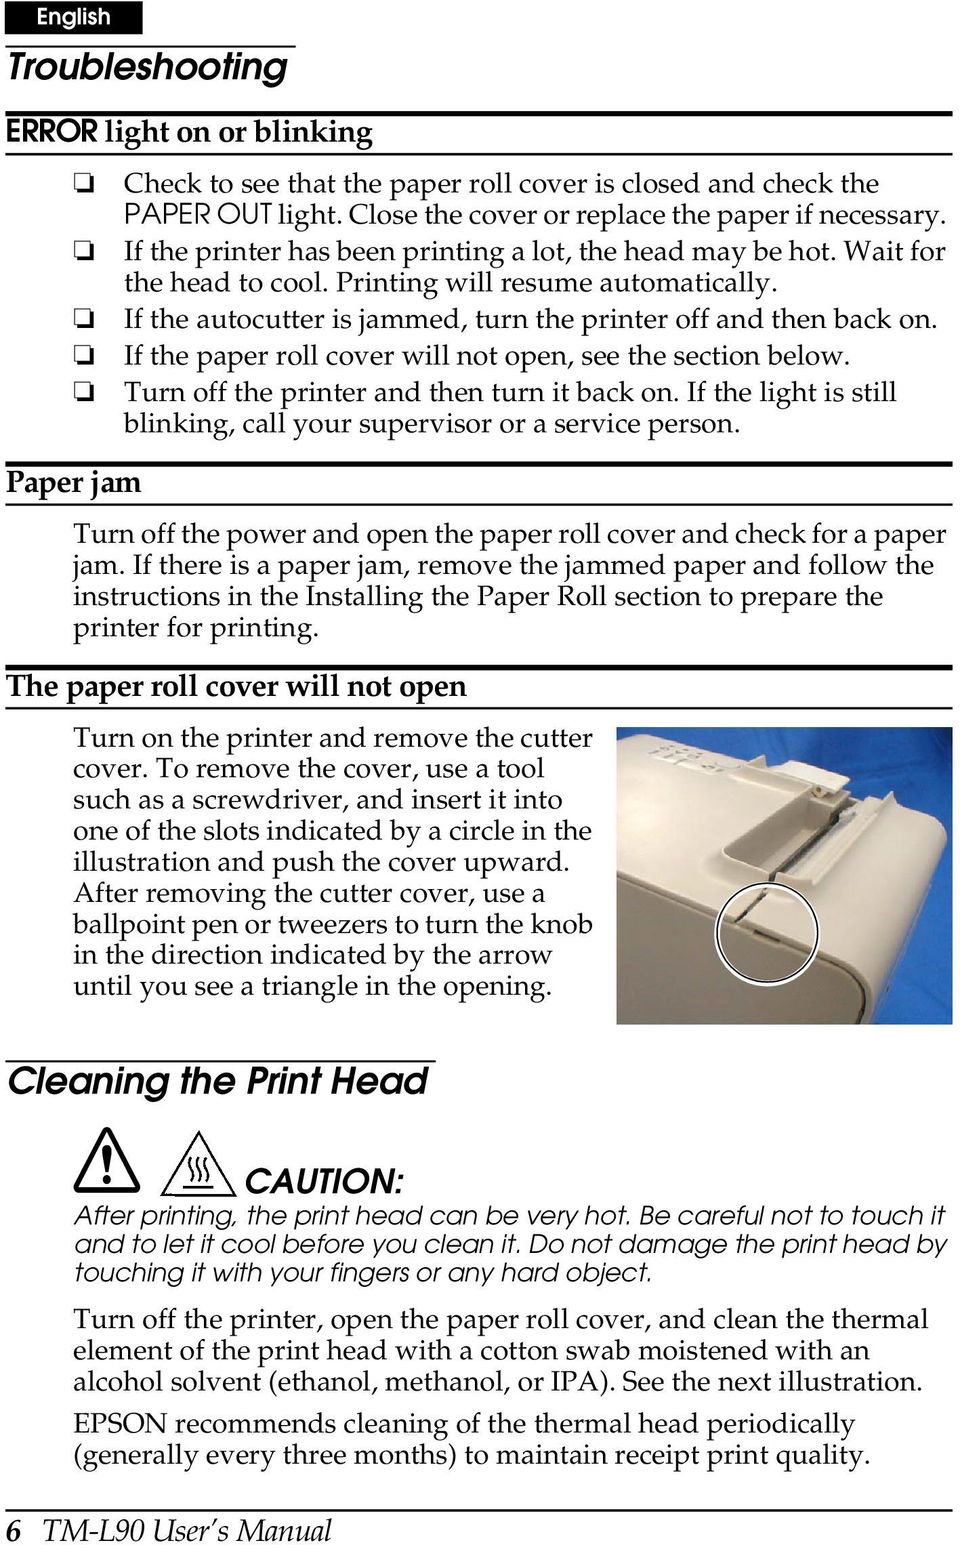 If the paper roll cover will not open, see the section below. Turn off the printer and then turn it back on. If the light is still blinking, call your supervisor or a service person.